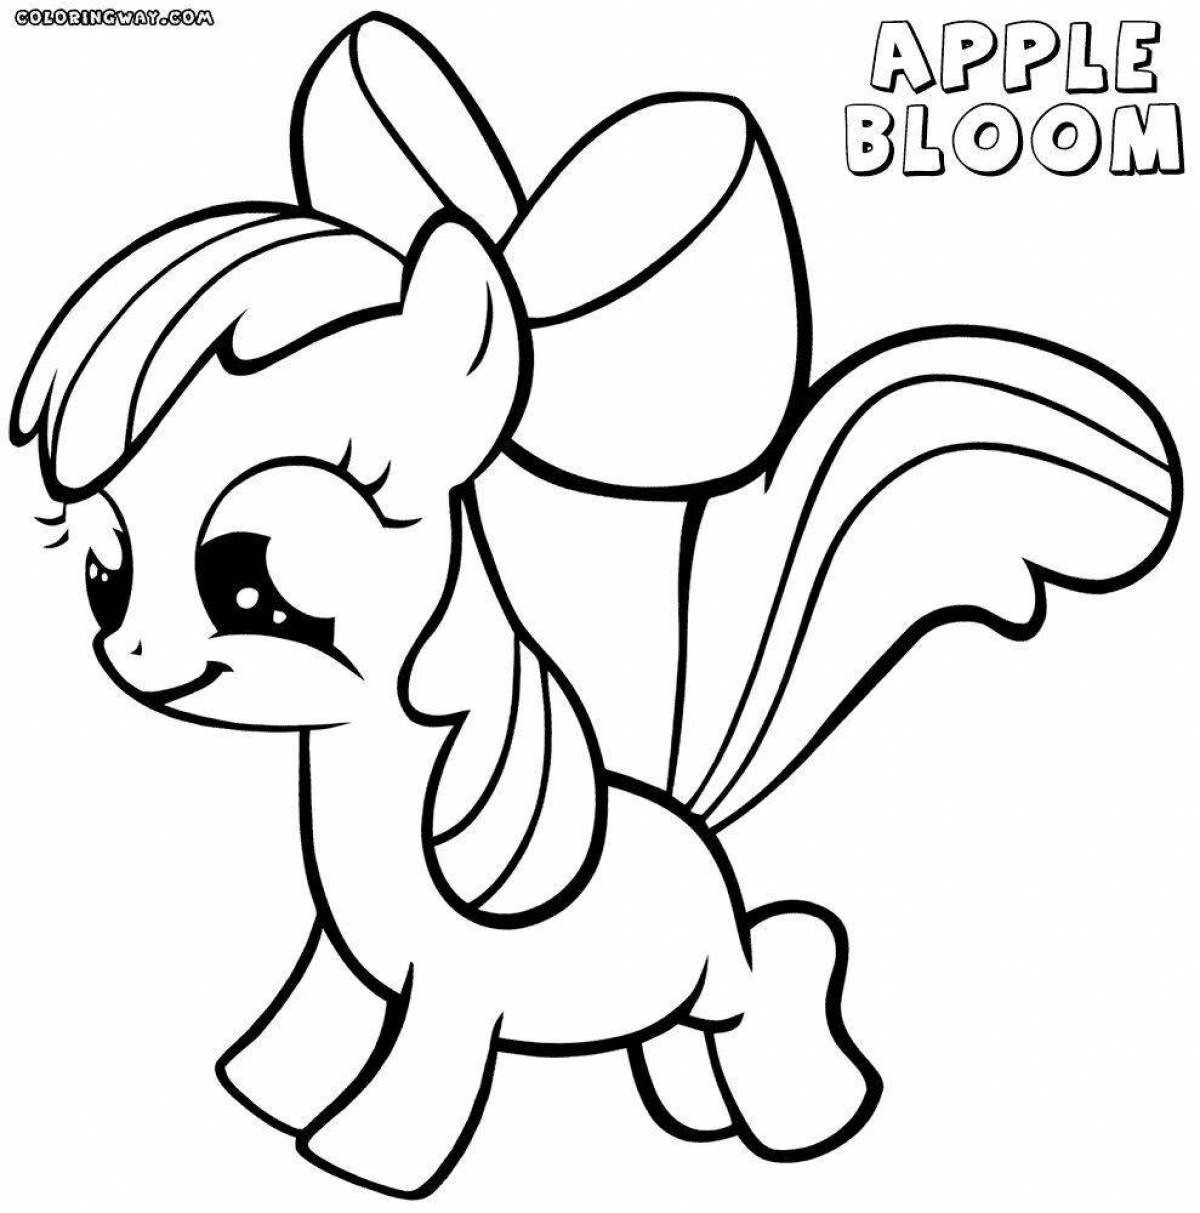 Beautiful apple bloom coloring page